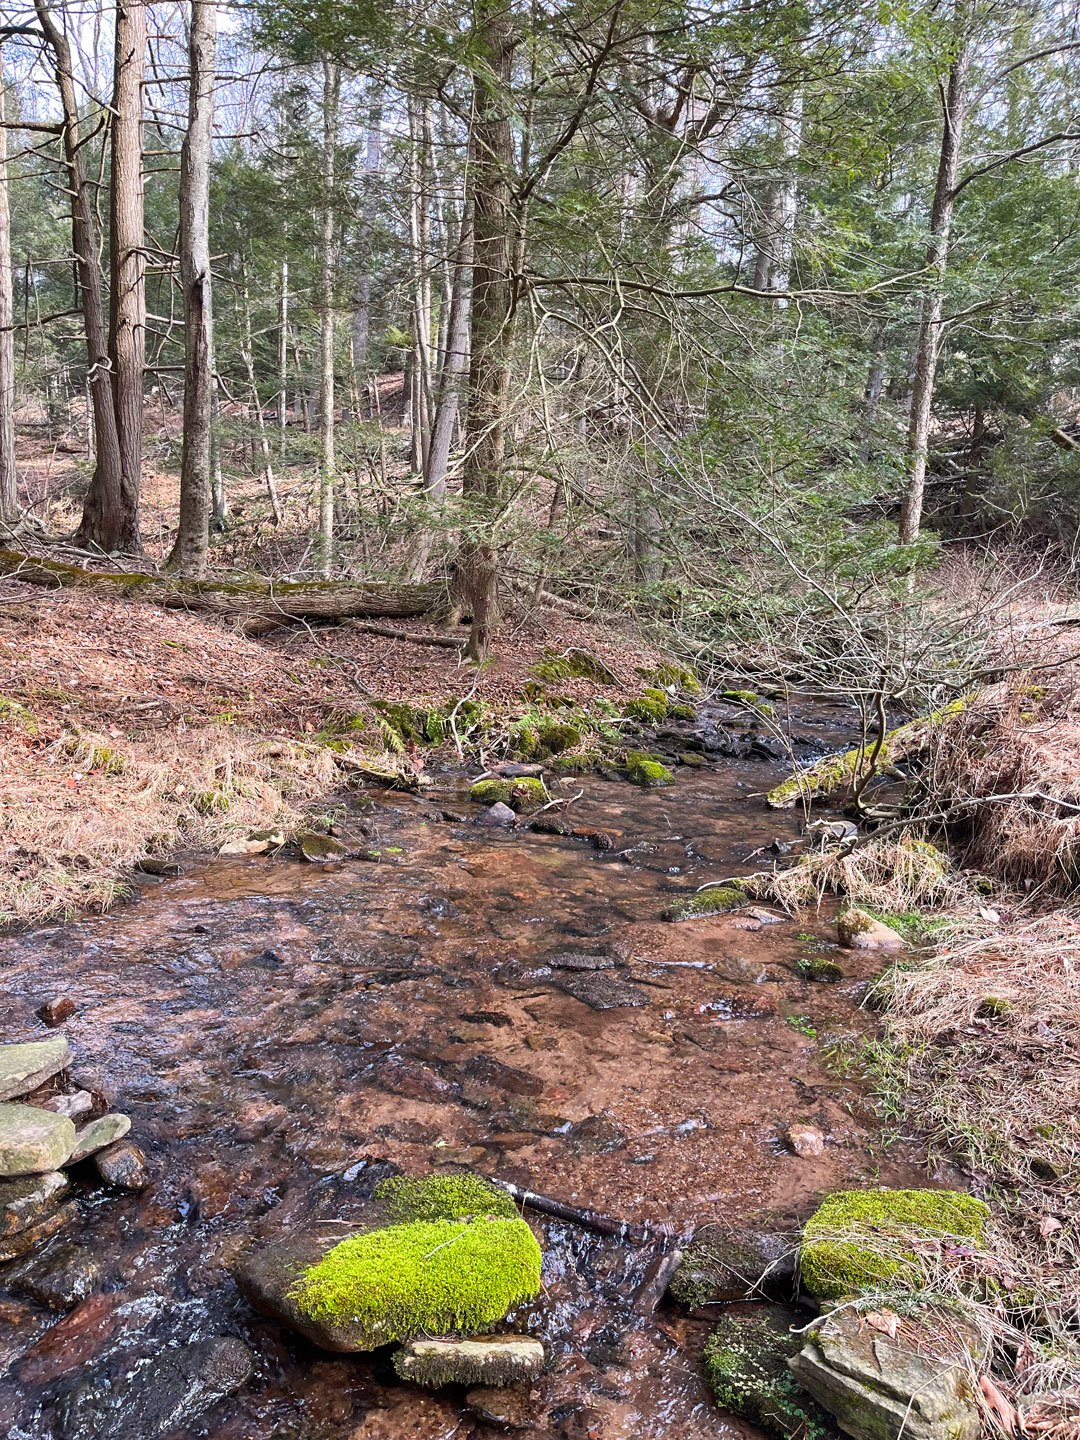 Berks Nature Pine Creek Headwaters Project. Photo courtesy of Berks Nature